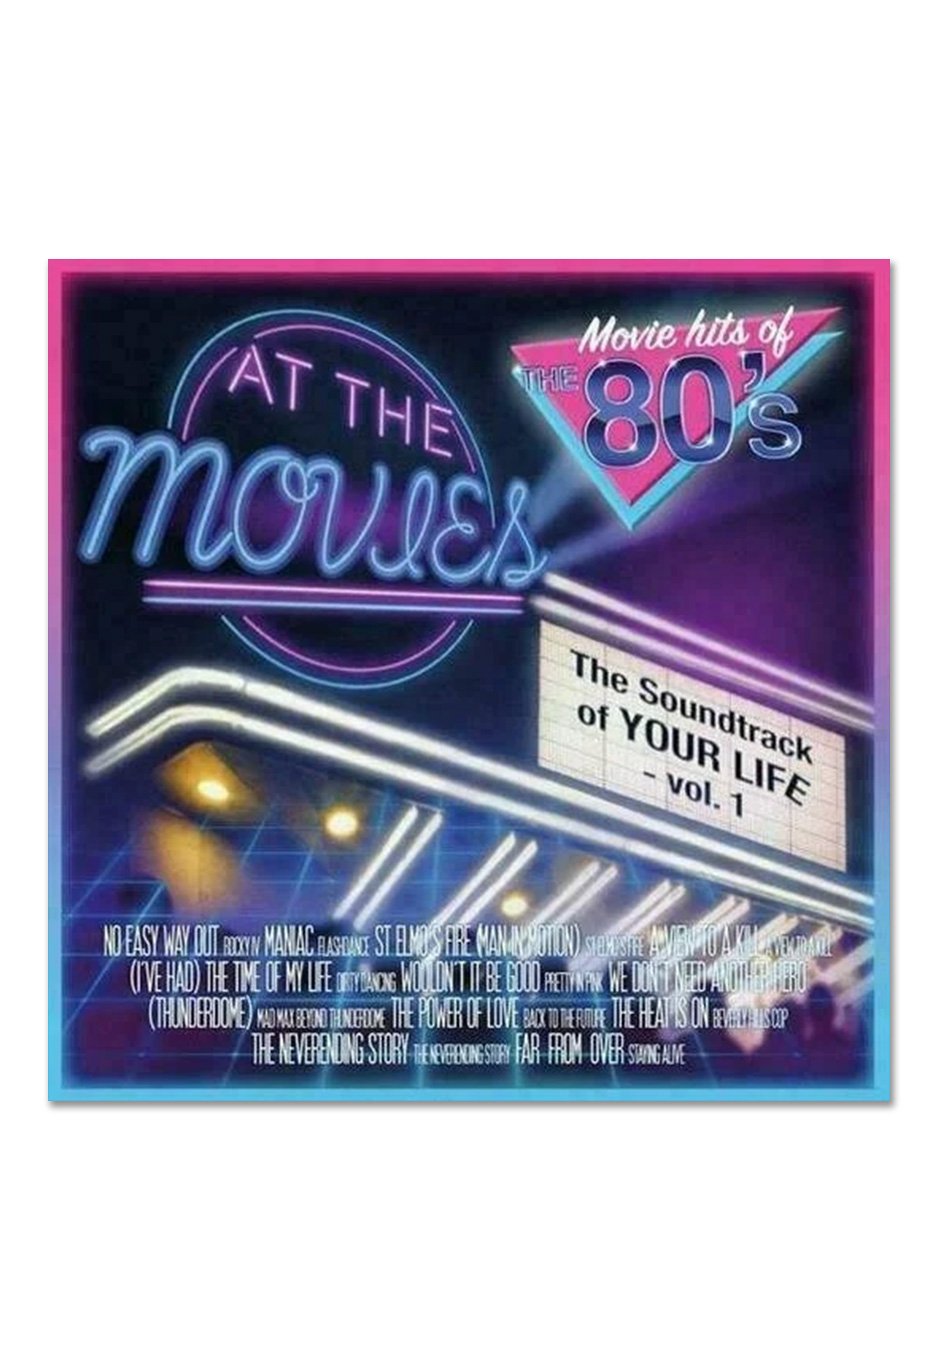 At The Movies - Soundtrack Of Your Life Vol. 1 Clear - Colored Vinyl